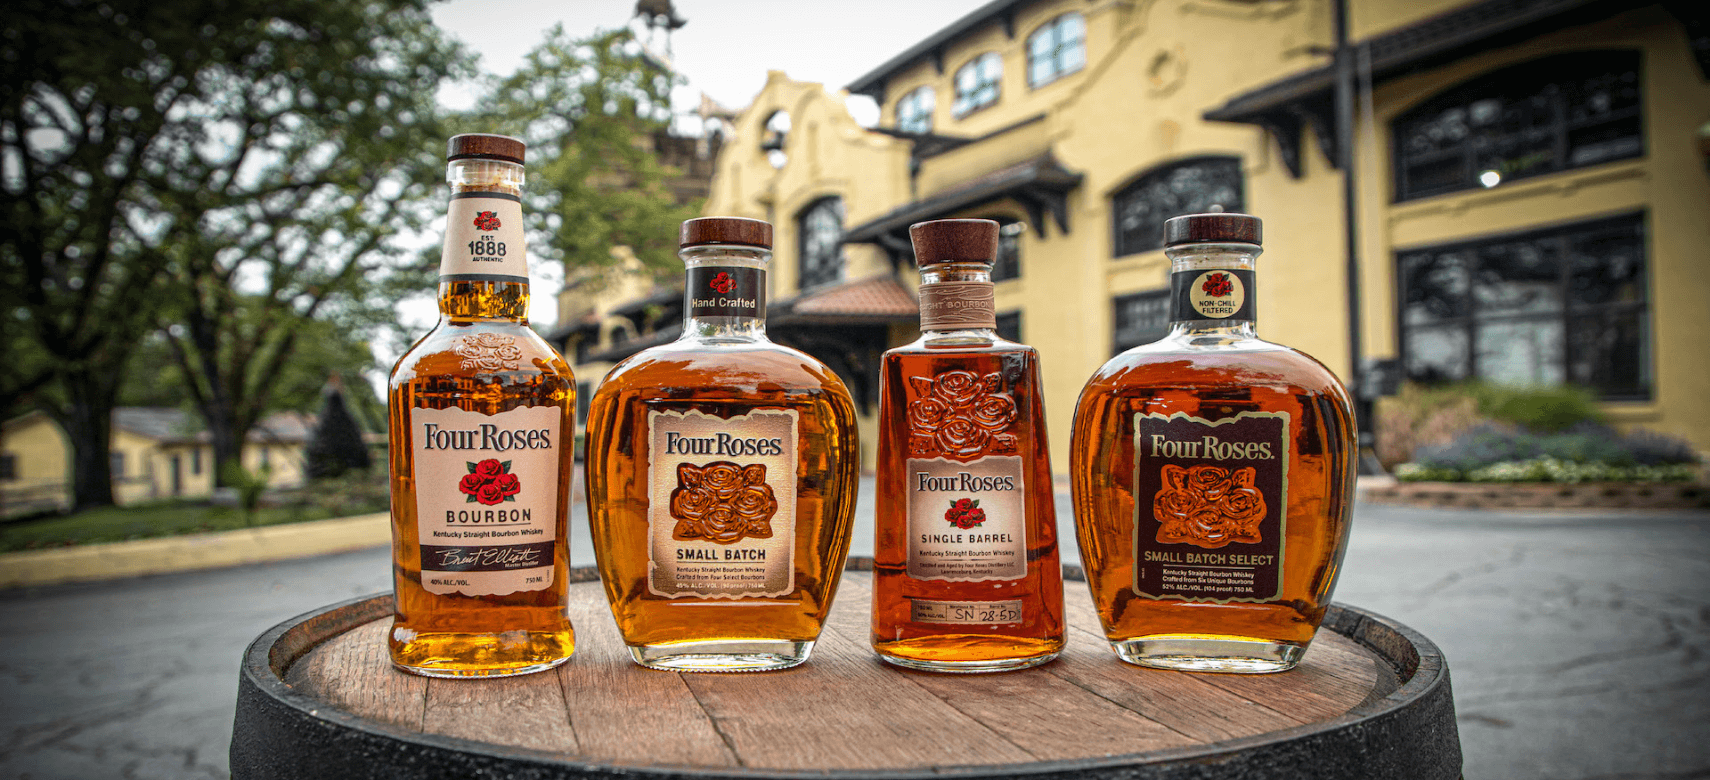 Photo for: How Four Roses, a renowned American bourbon producer has incorporated AI technology